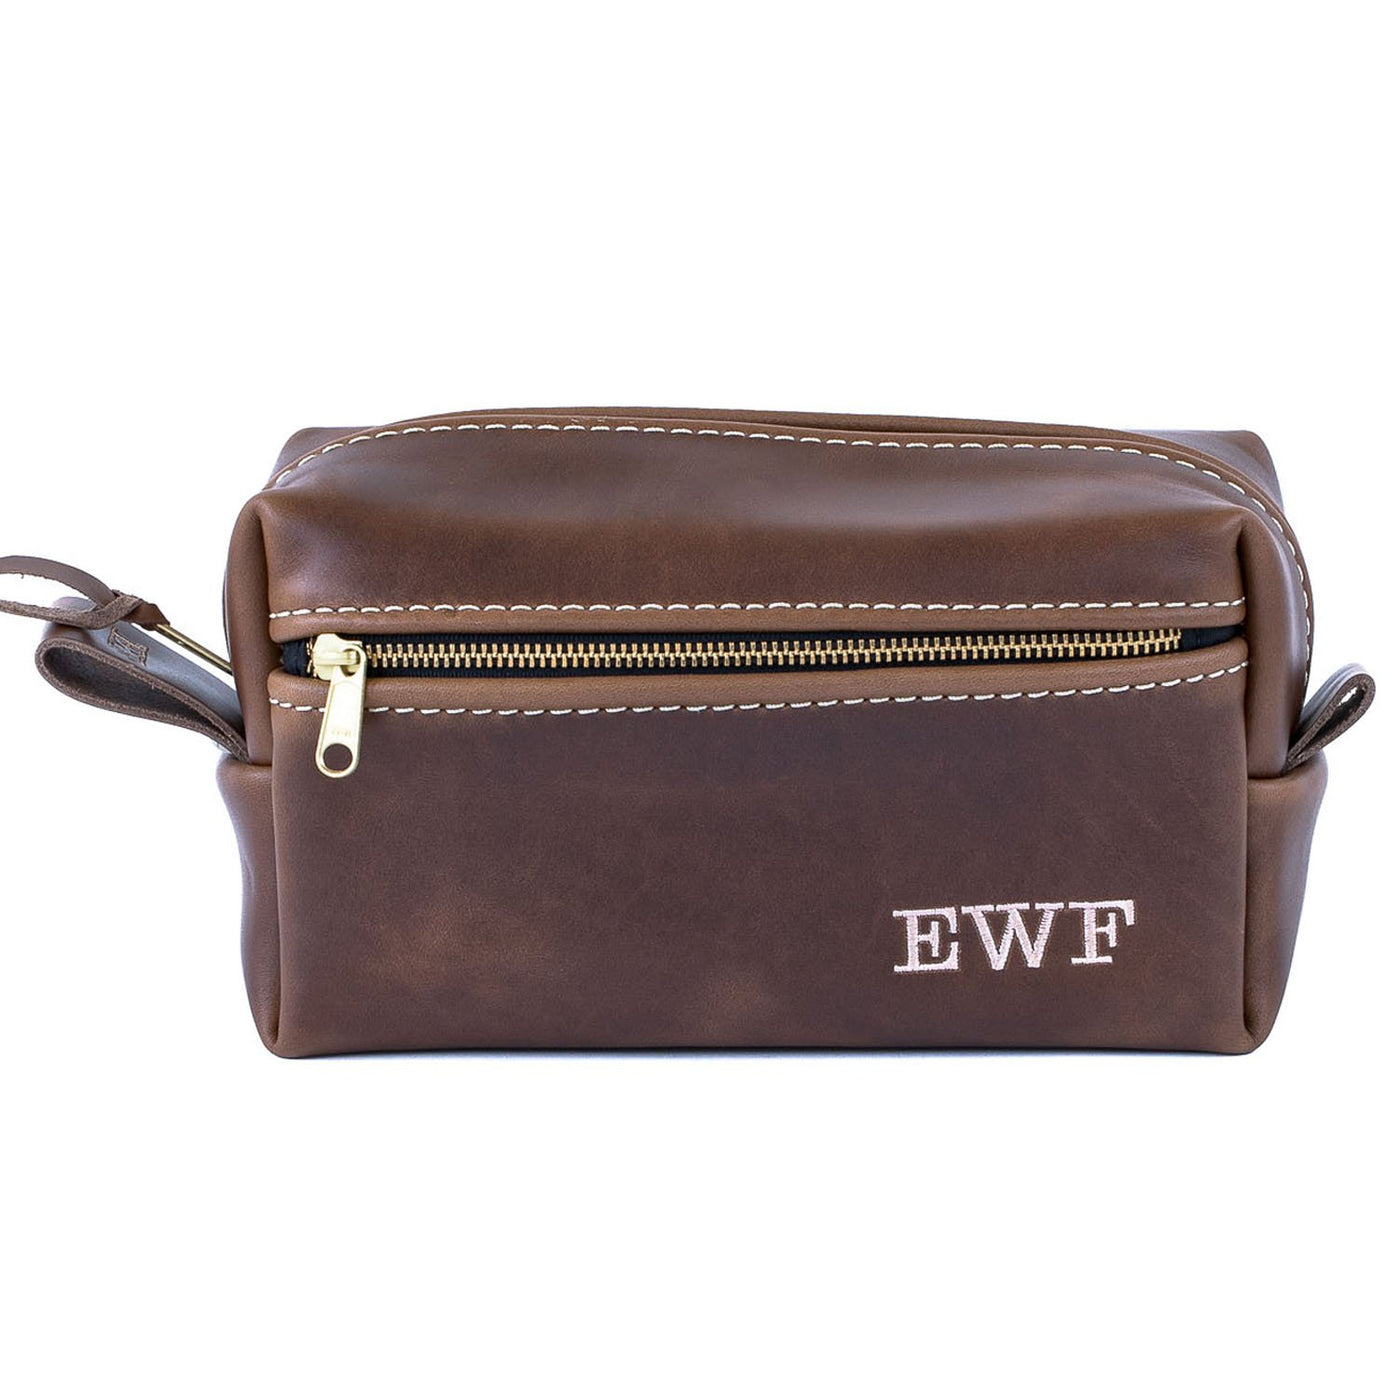 Double Zipper Toiletry Bag by Lifetime Leather Co